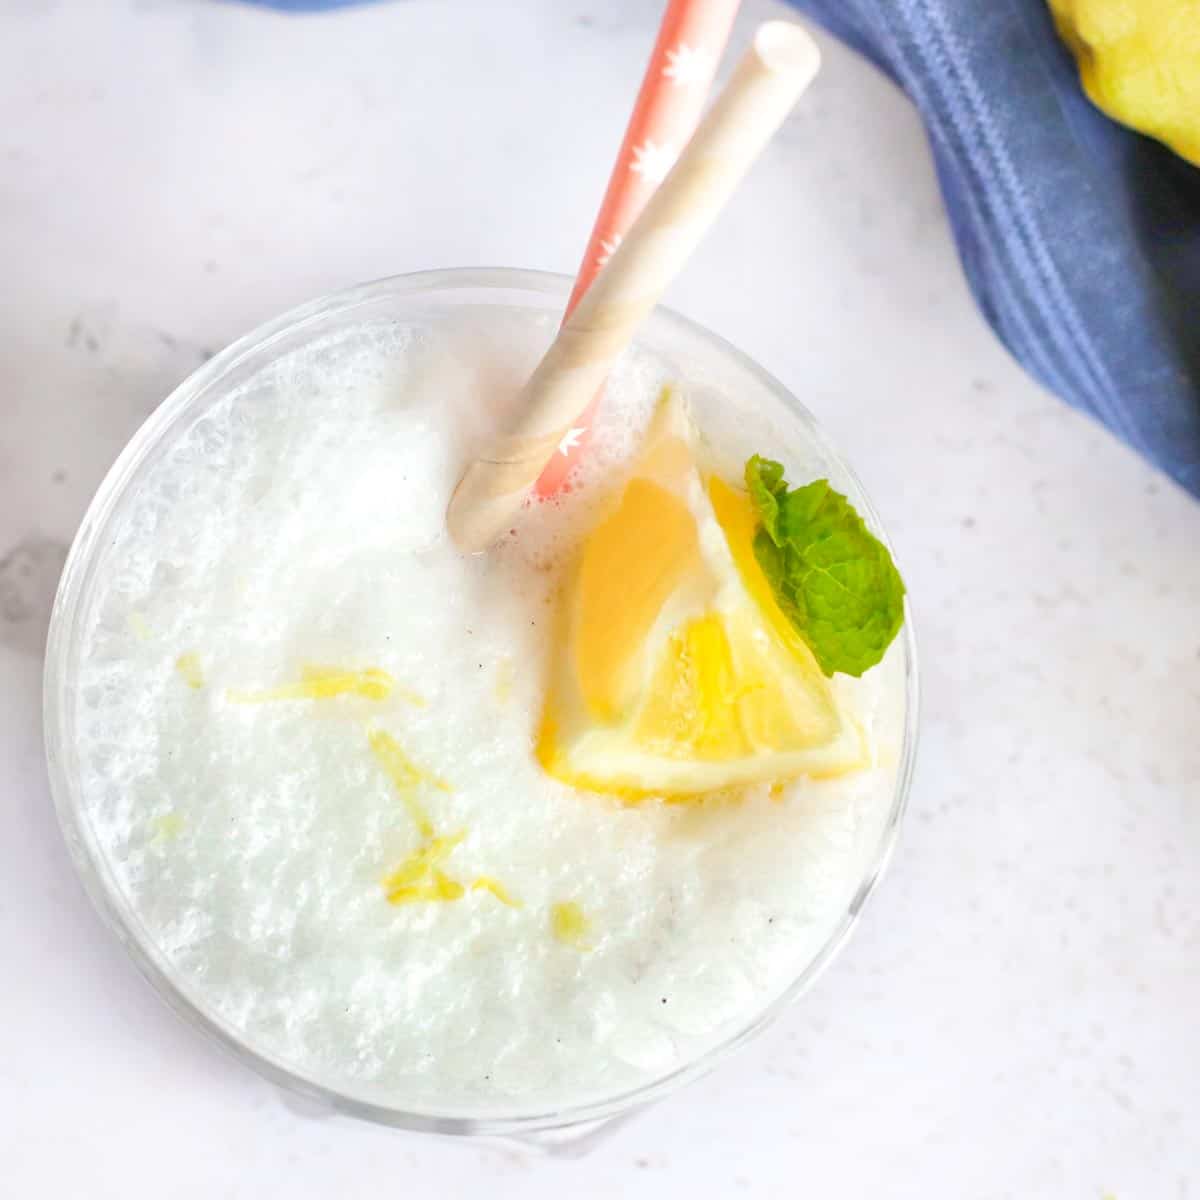 Overhead close up shot of frosted lemonade garnished with lemon and mint with two straws and a blue cloth on the side.